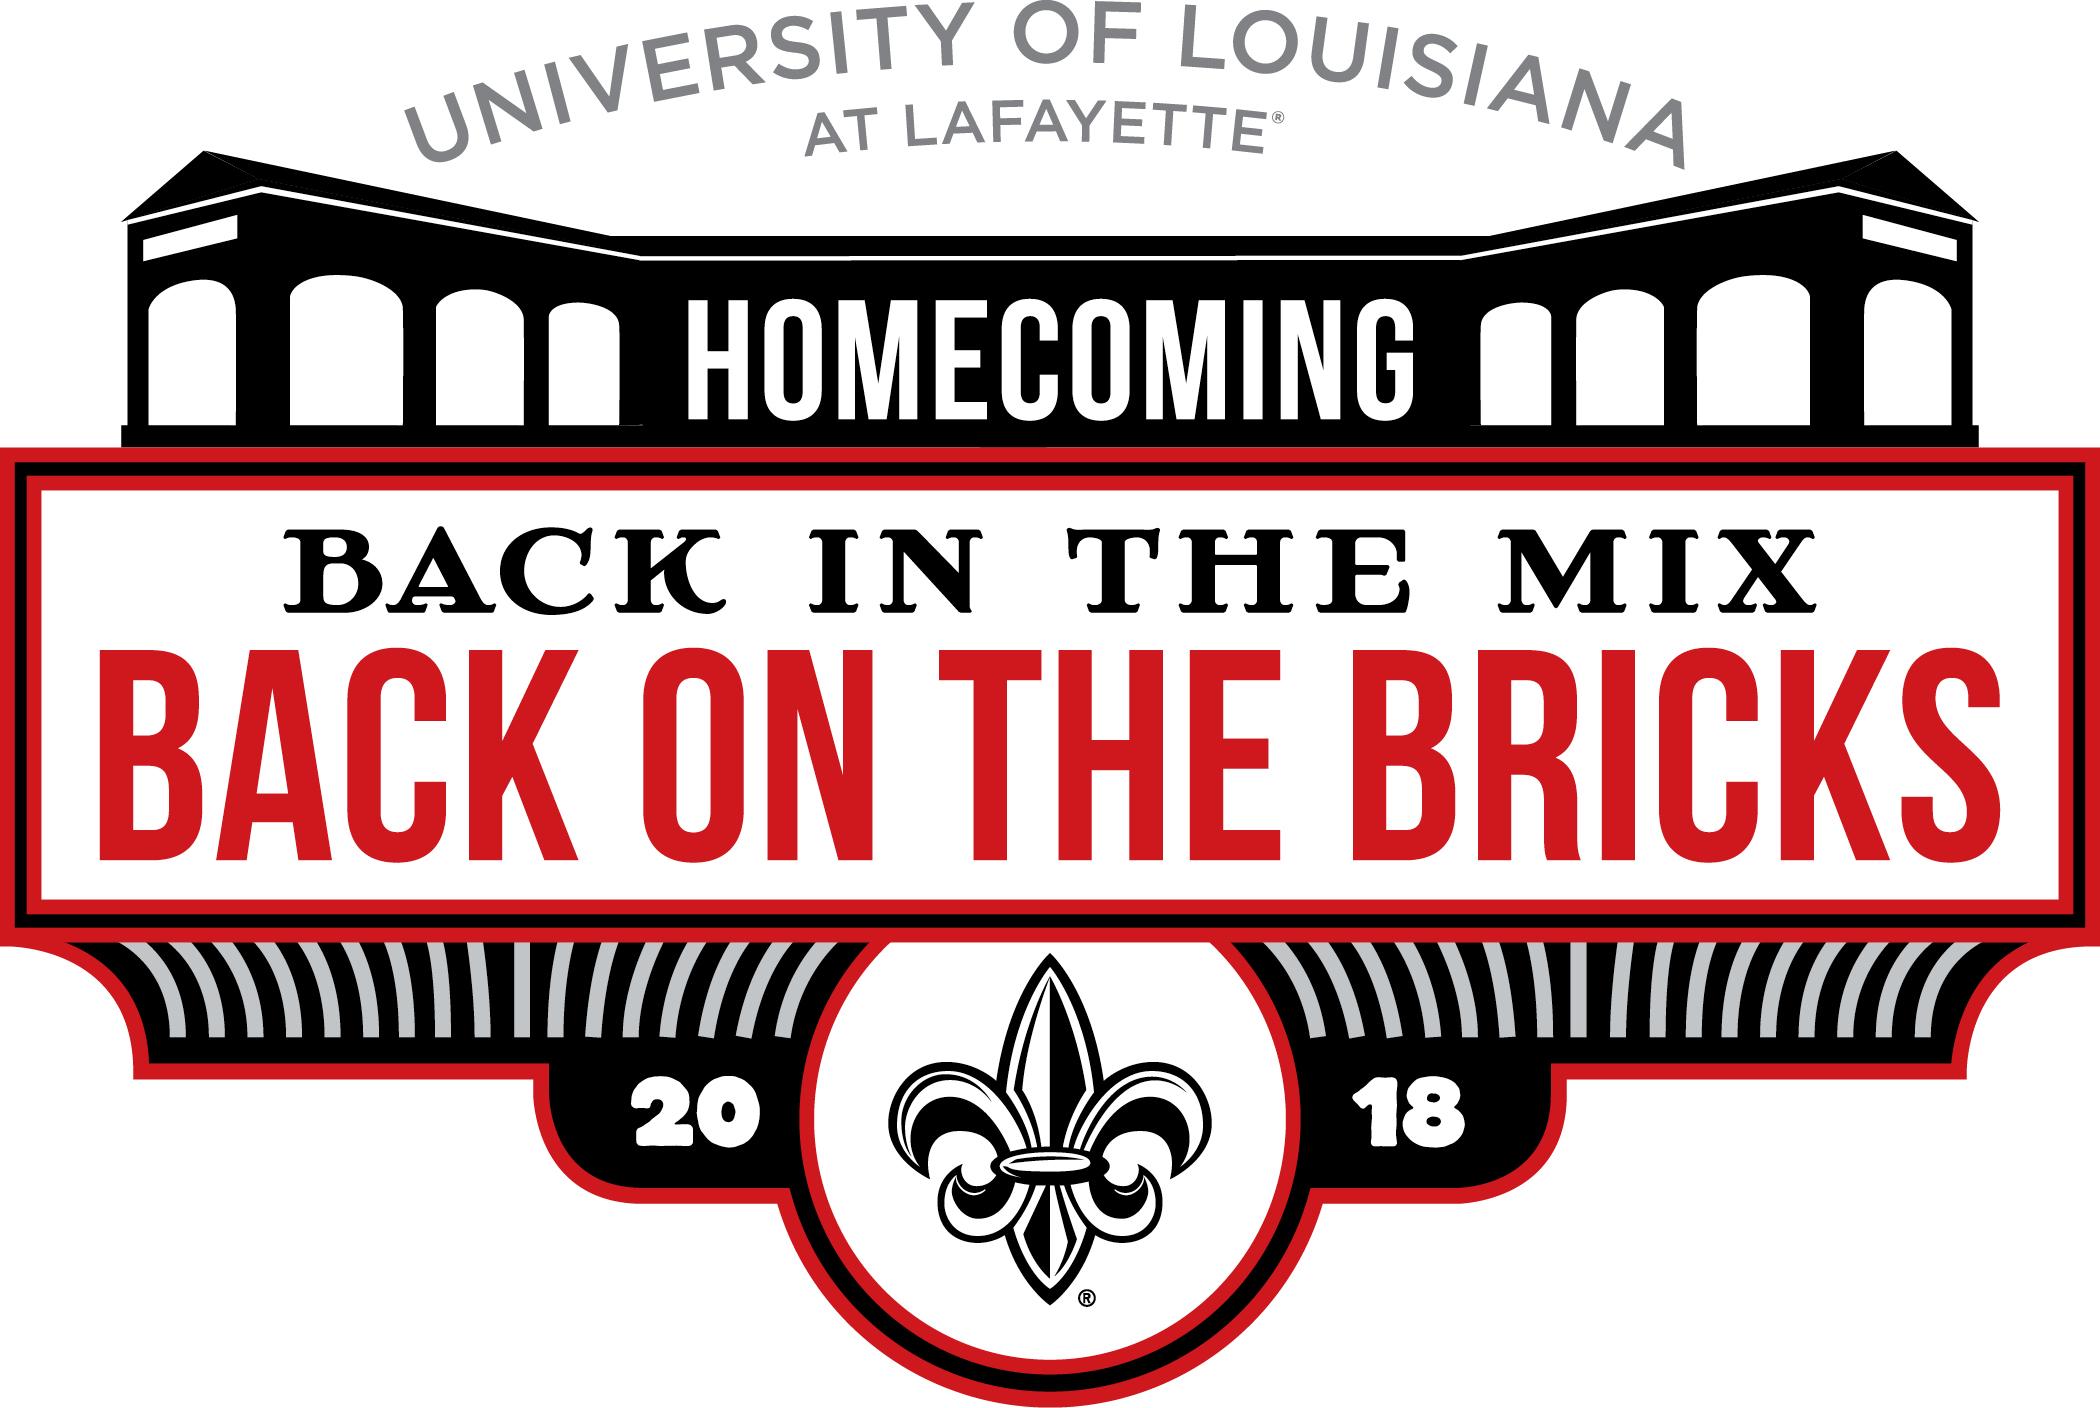 UL Lafayette Week features entertainment and activities for